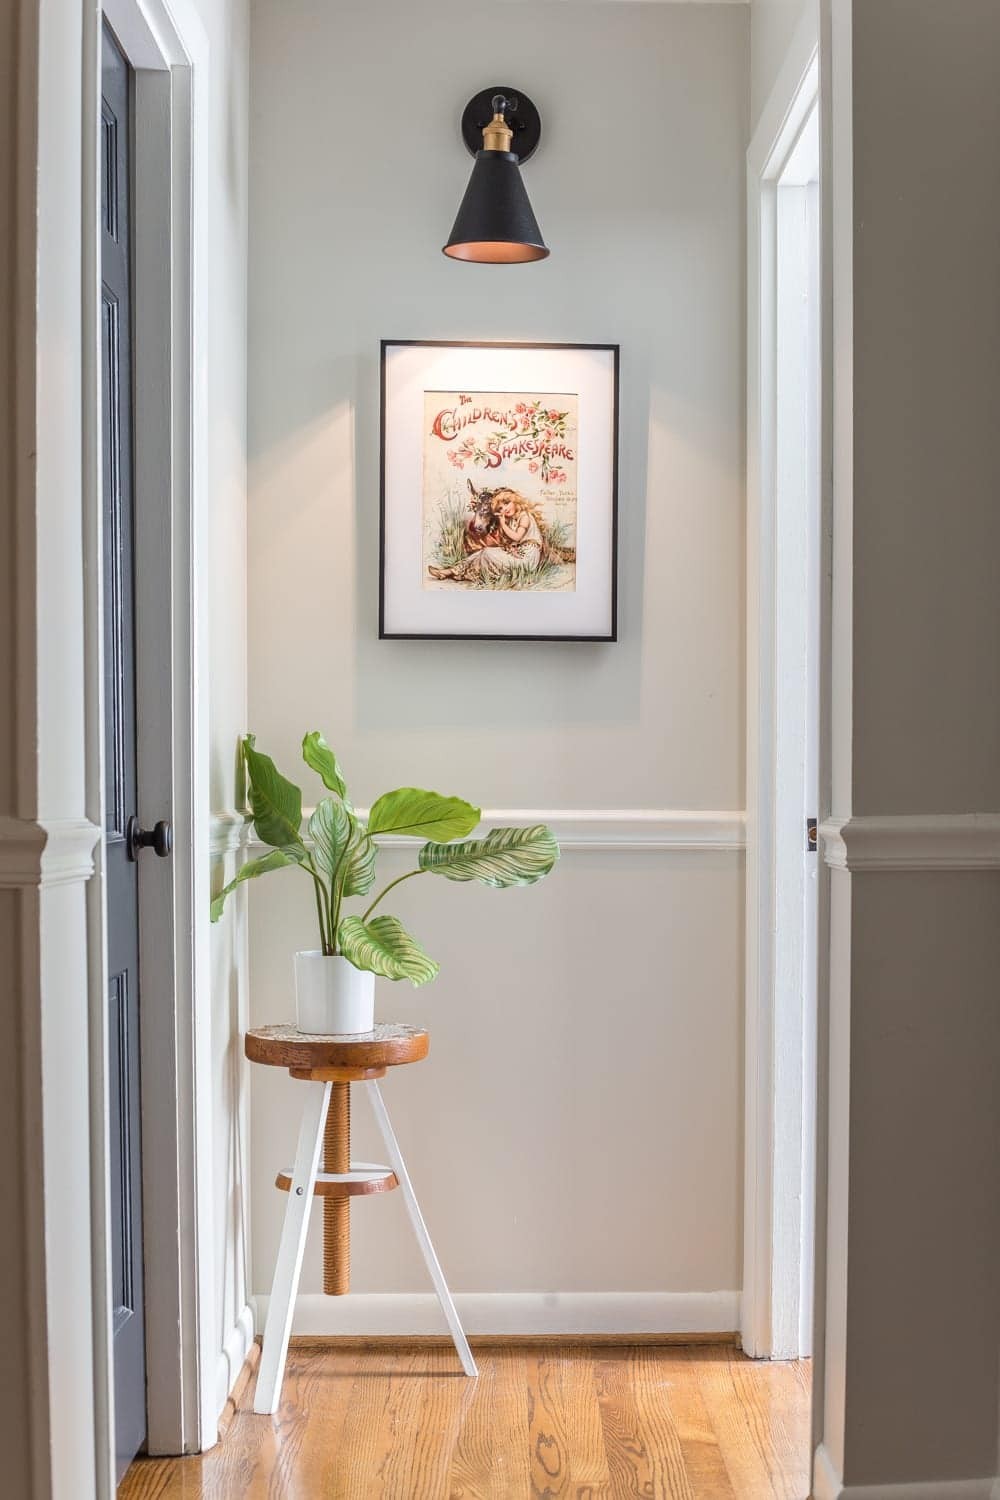 hallway with wall sconce light above artwork and indoor plant